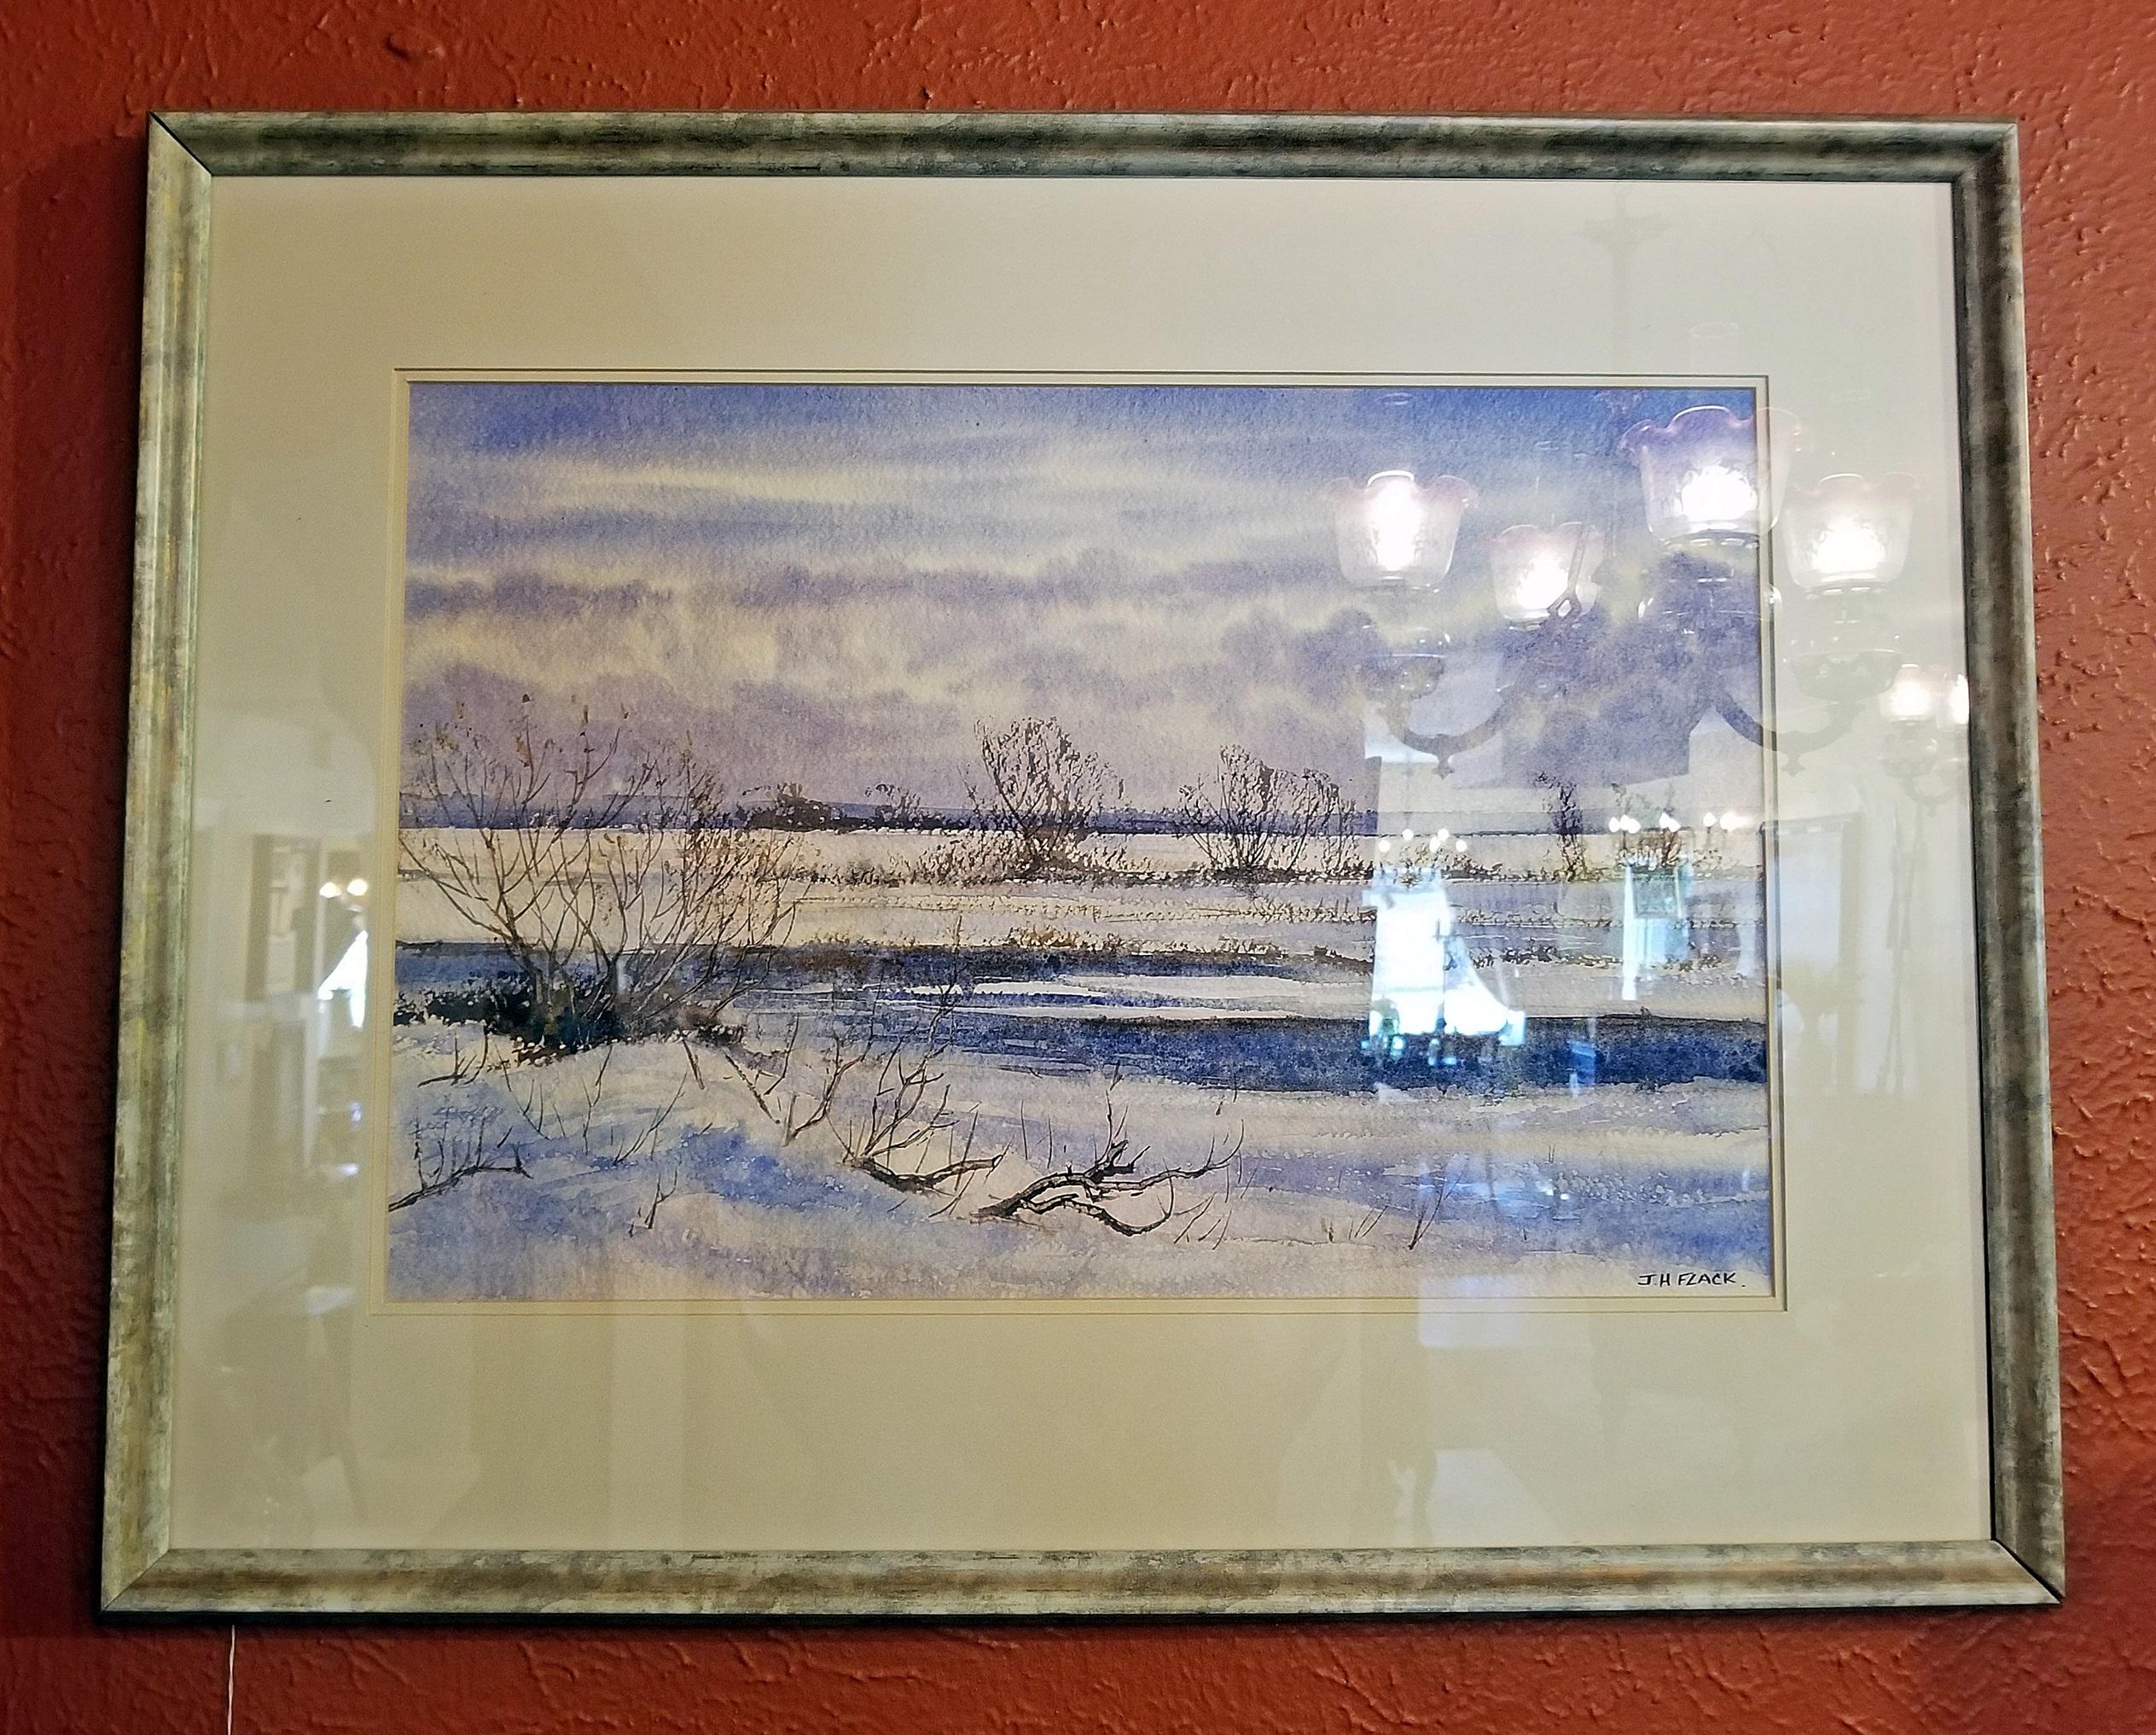 PRESENTING a FABULOUS piece of original Irish Art, namely, an original Irish Watercolor by Rev JH Flack of Winter on ‘The Bog of Allen’

Painting by popular and well known, exhibited, watercolorist and Irish Artist – The Late Rev. J.H. Flack of